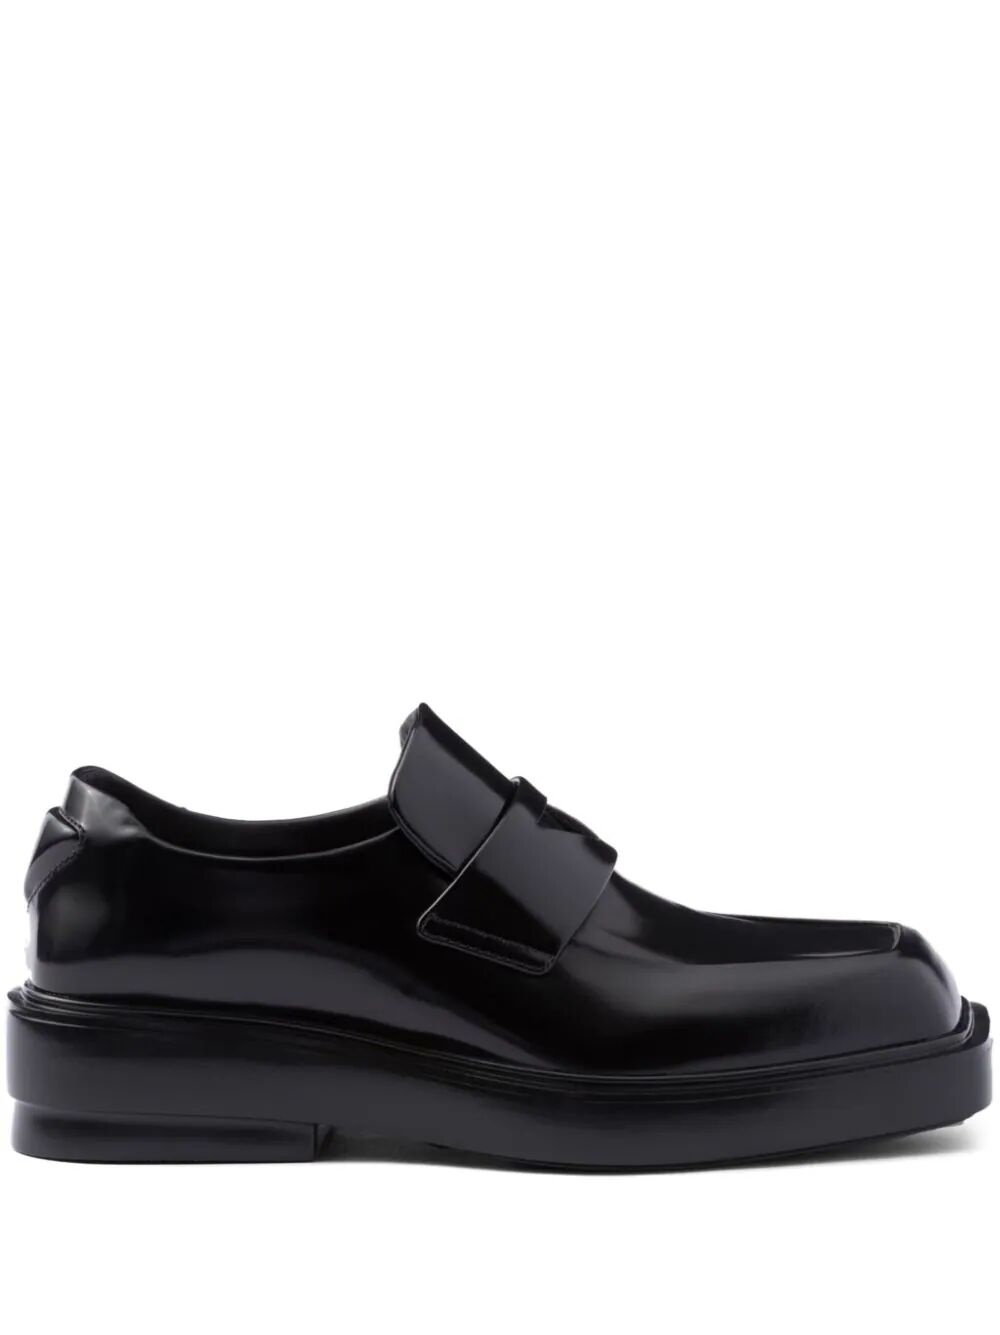 PRADA FENDER SQUARE LEATHER LOAFERS - 22